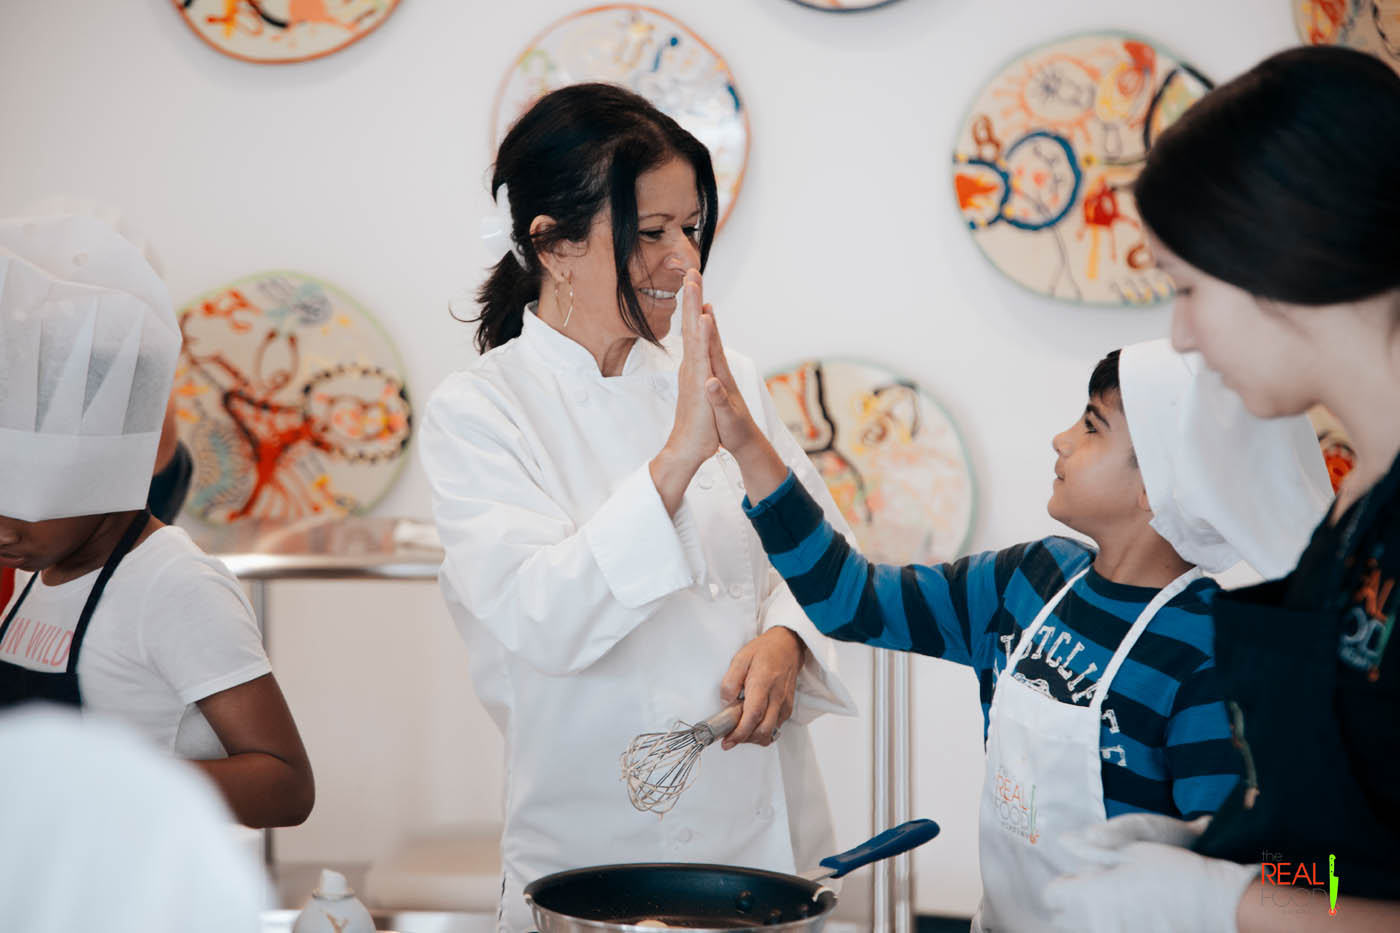 Head chef Maria high fiving a child at The Real Food Academy's kids cooking classes in Miami, FL.